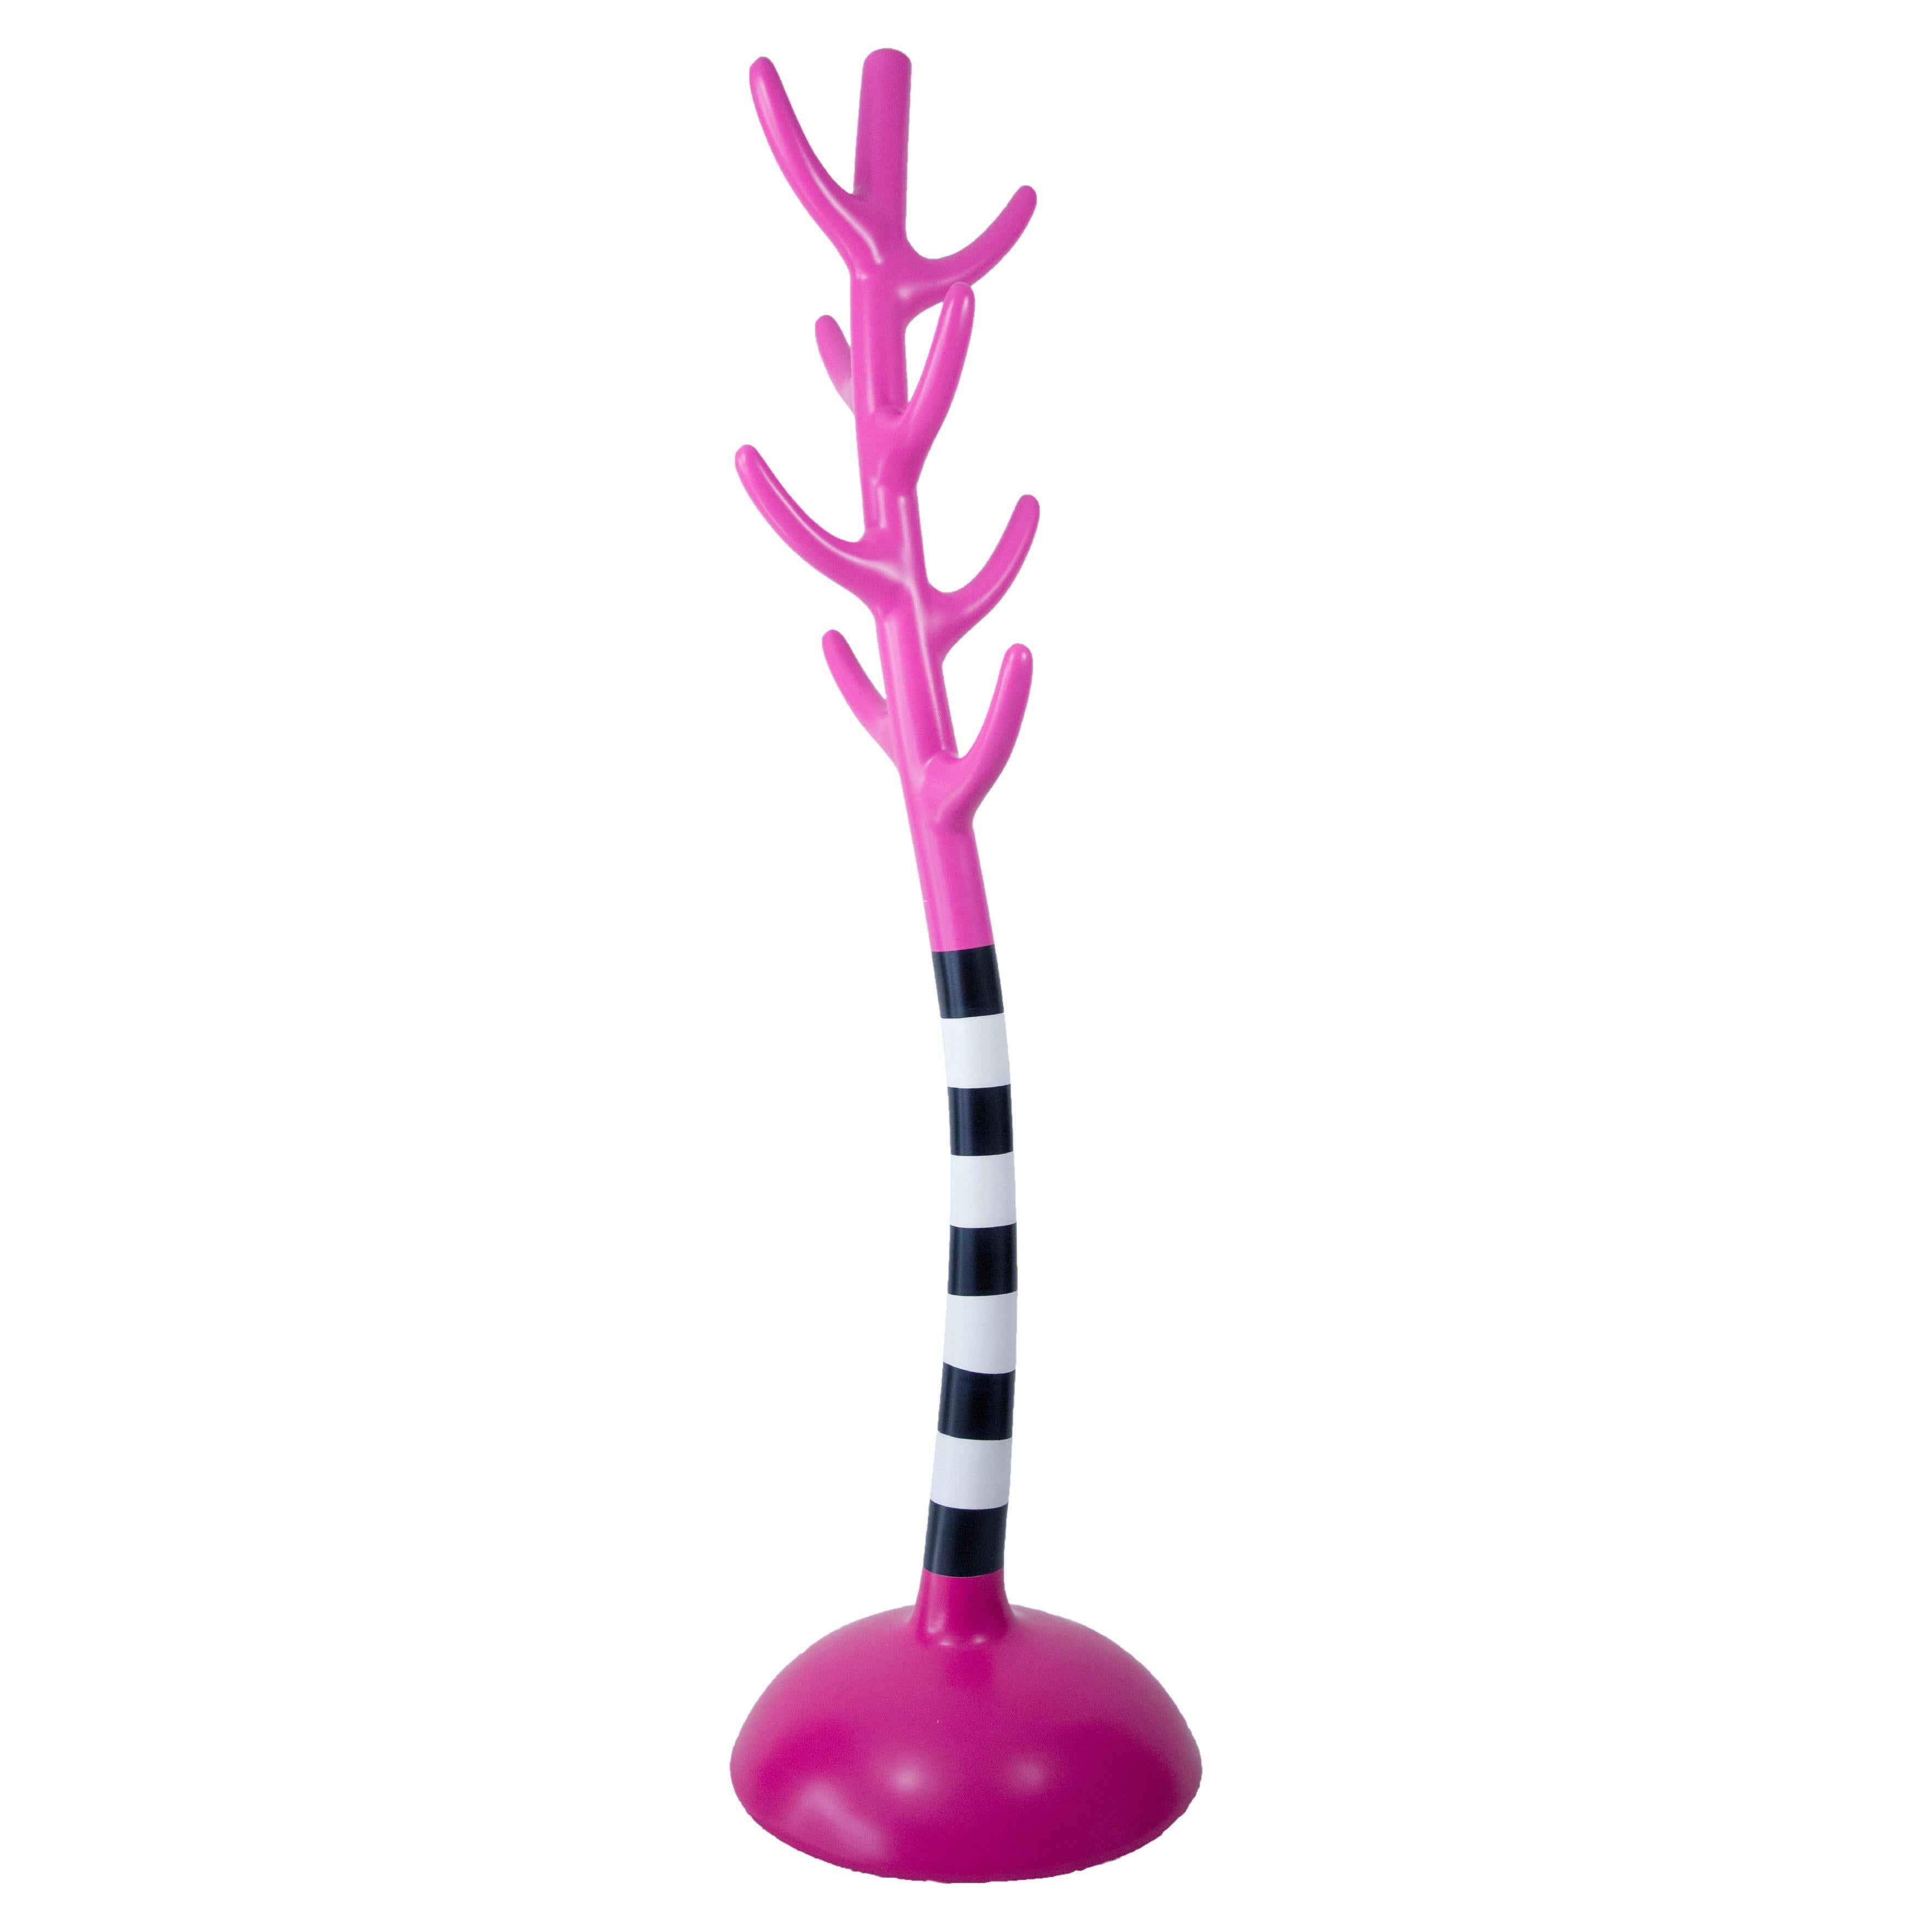 Crooked Pink Colourful Coat Rack, Amorphous Sculpture, Artistic For Sale